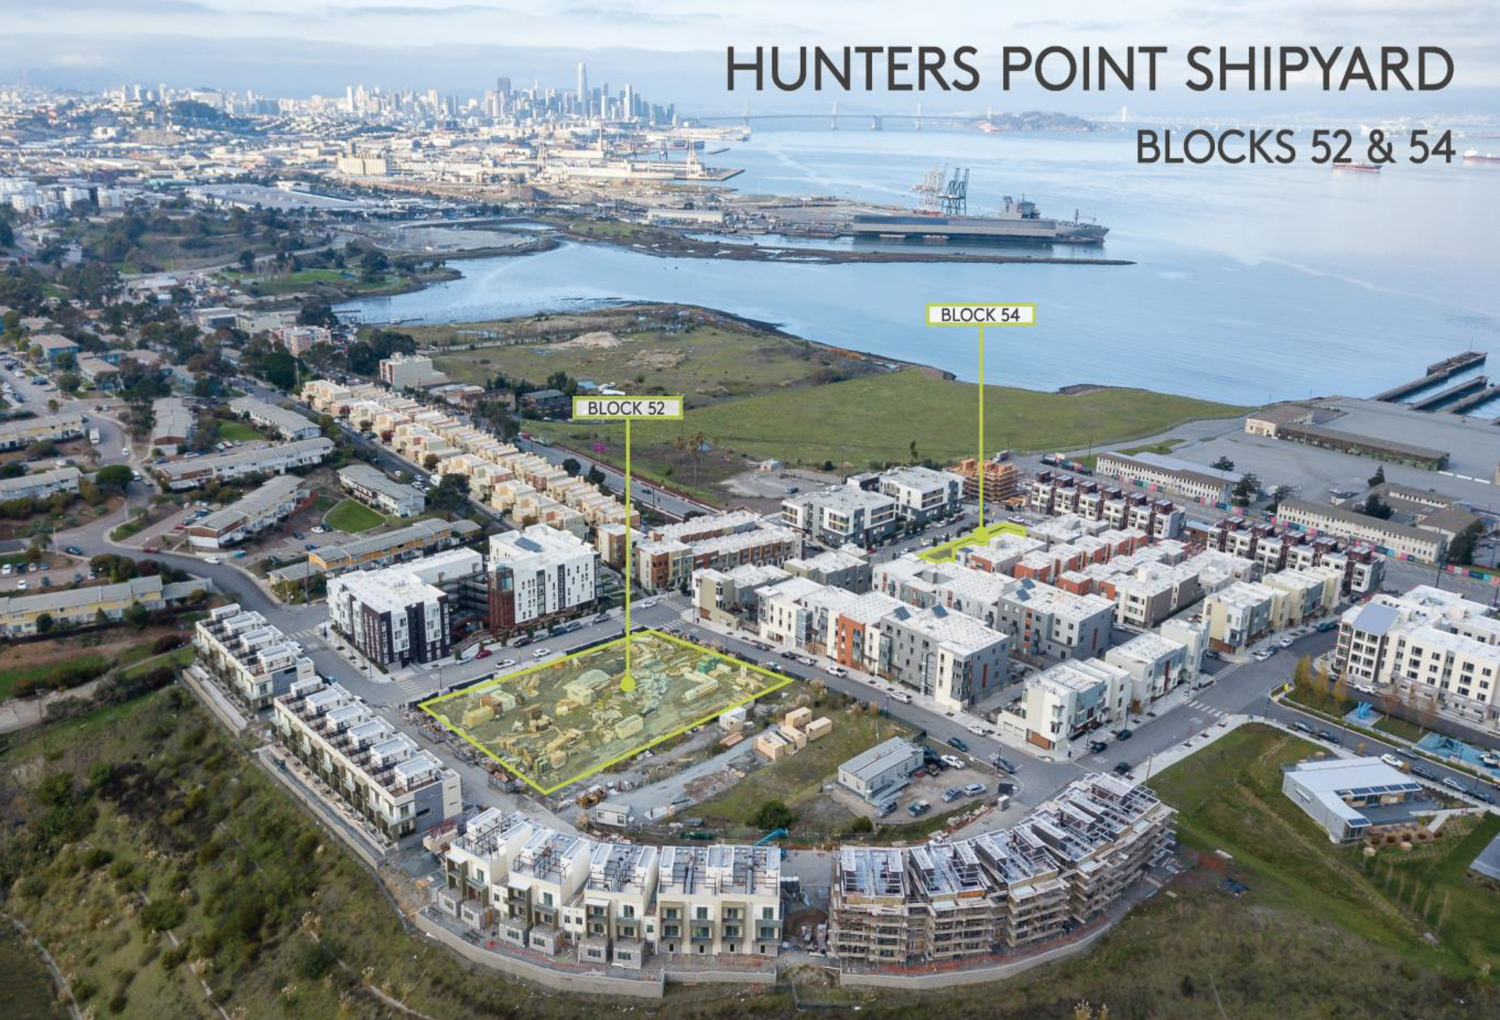 Hunters Point Shipyard aerial view with Blocks 52 and 54 property outlined in yellow